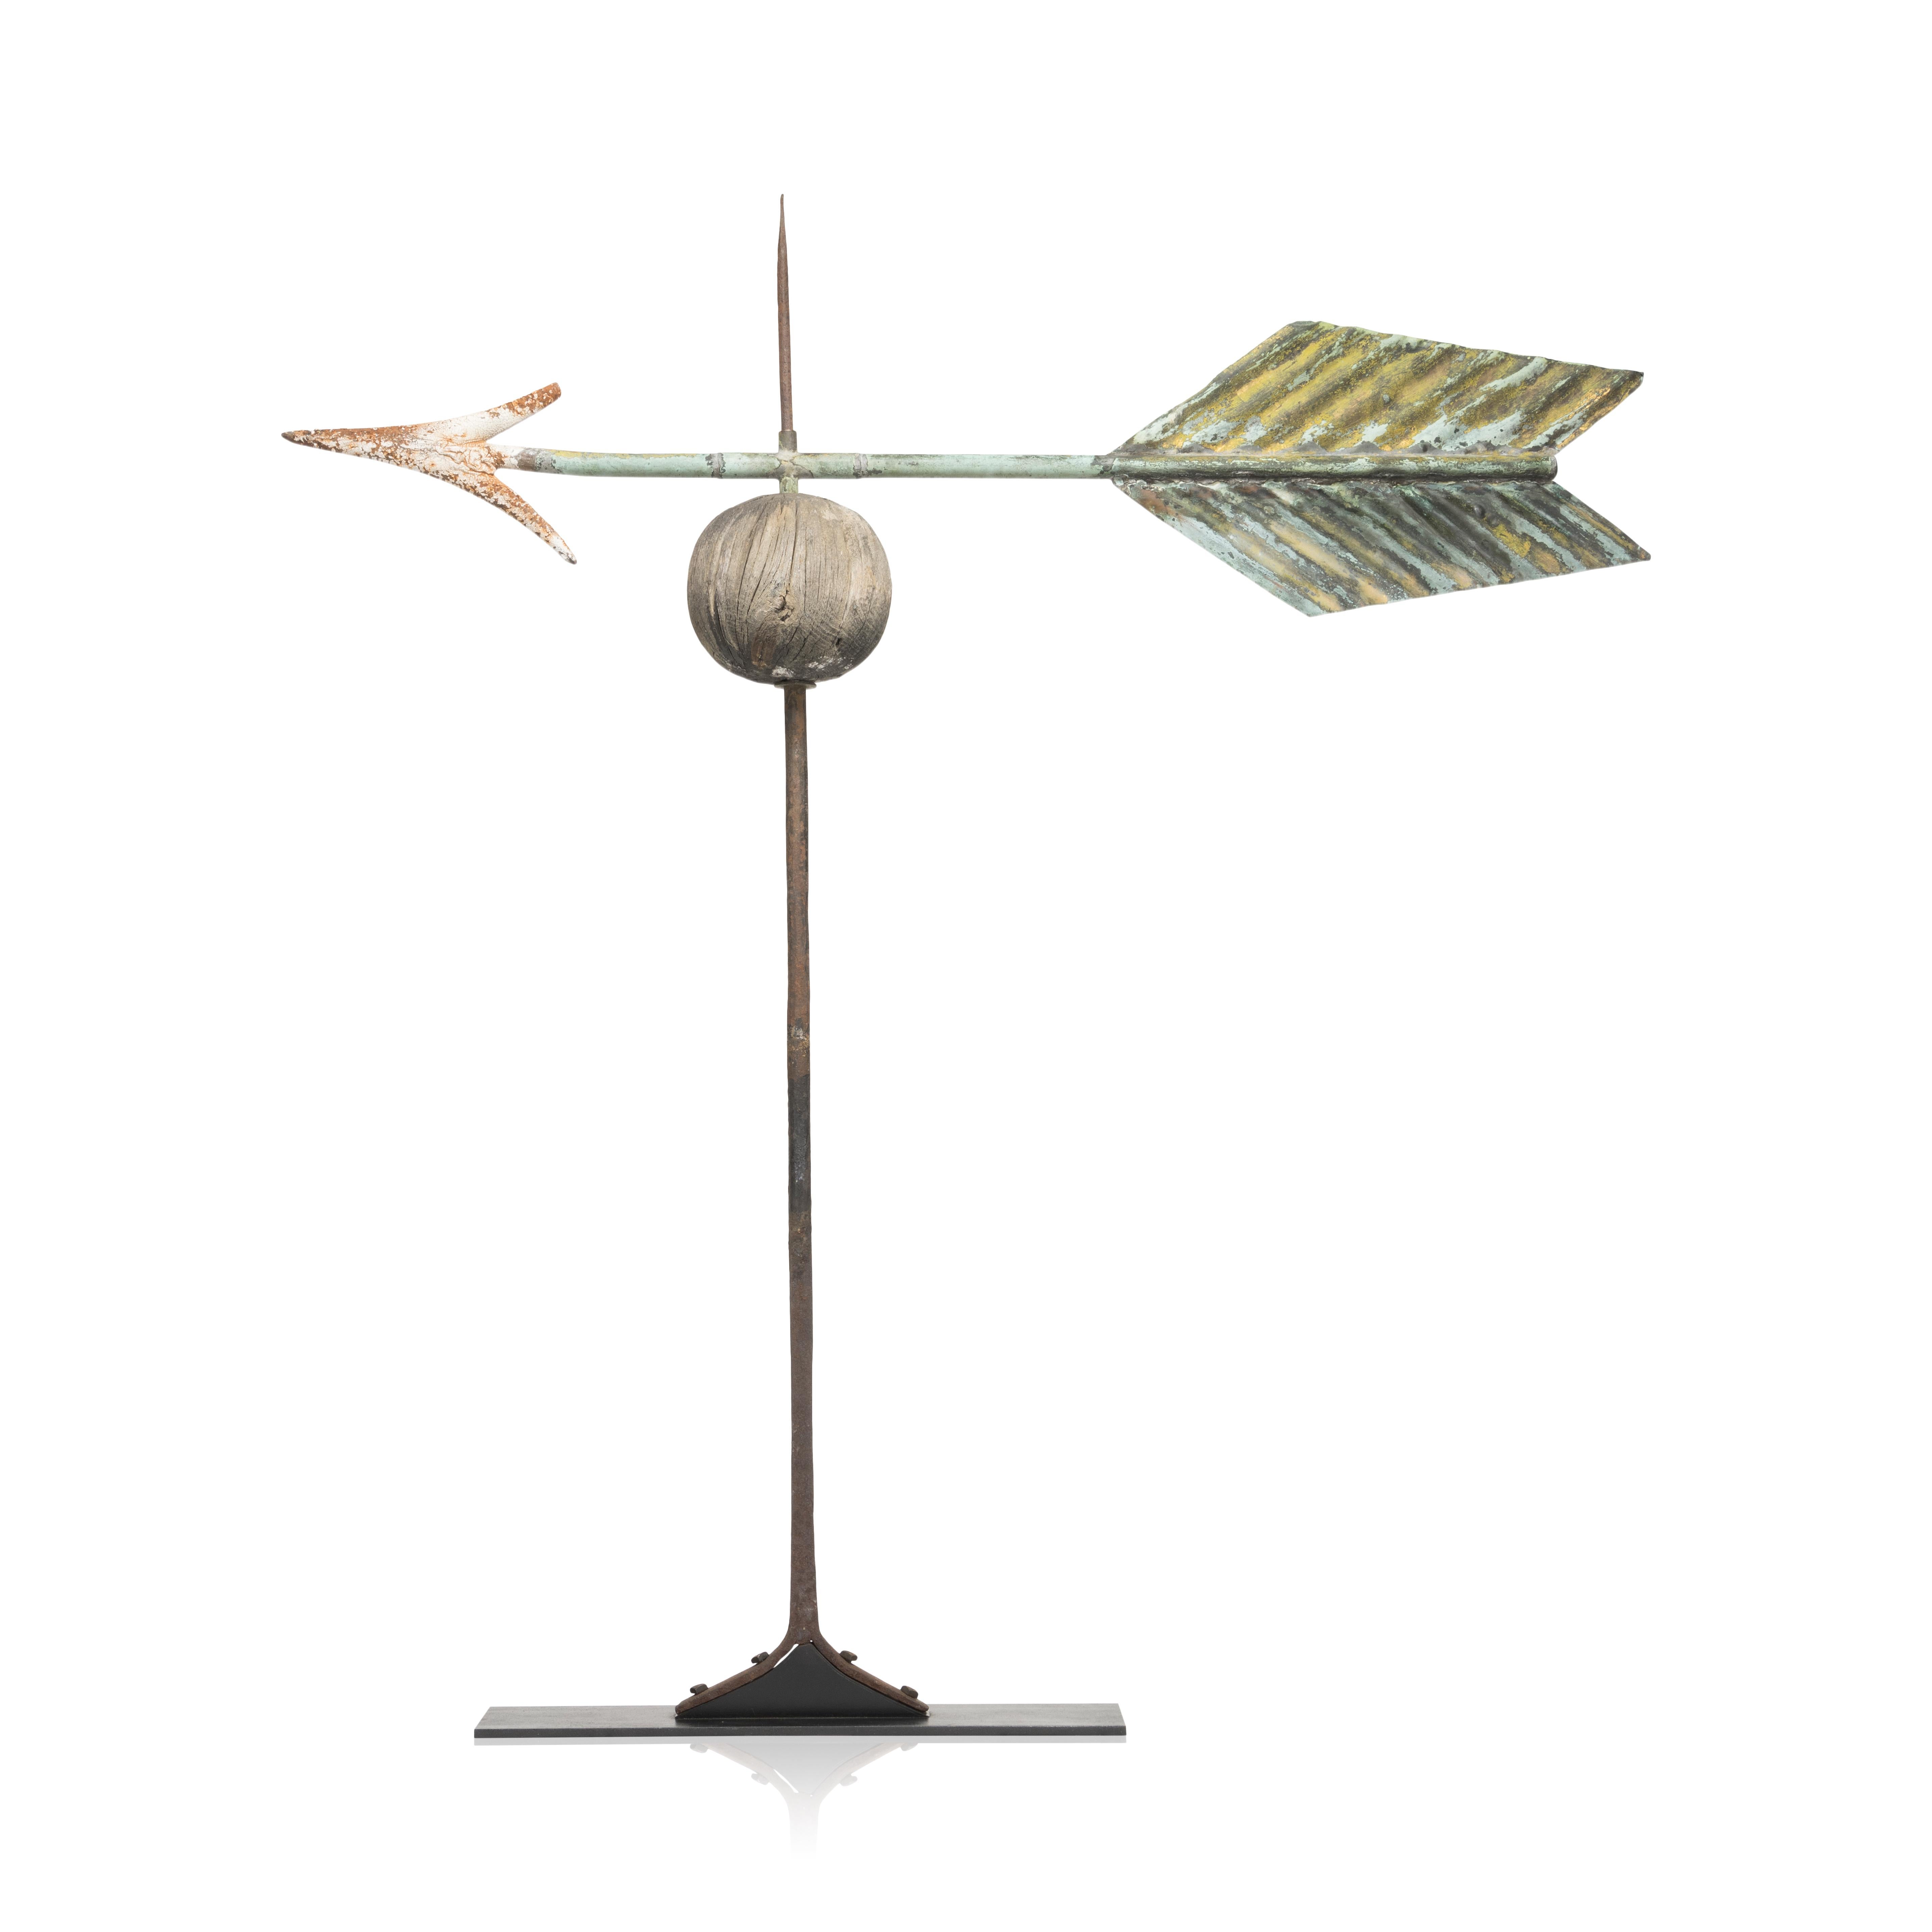 19th Century three dimensional copper arrow weather vane with wood ball. 40 1/2